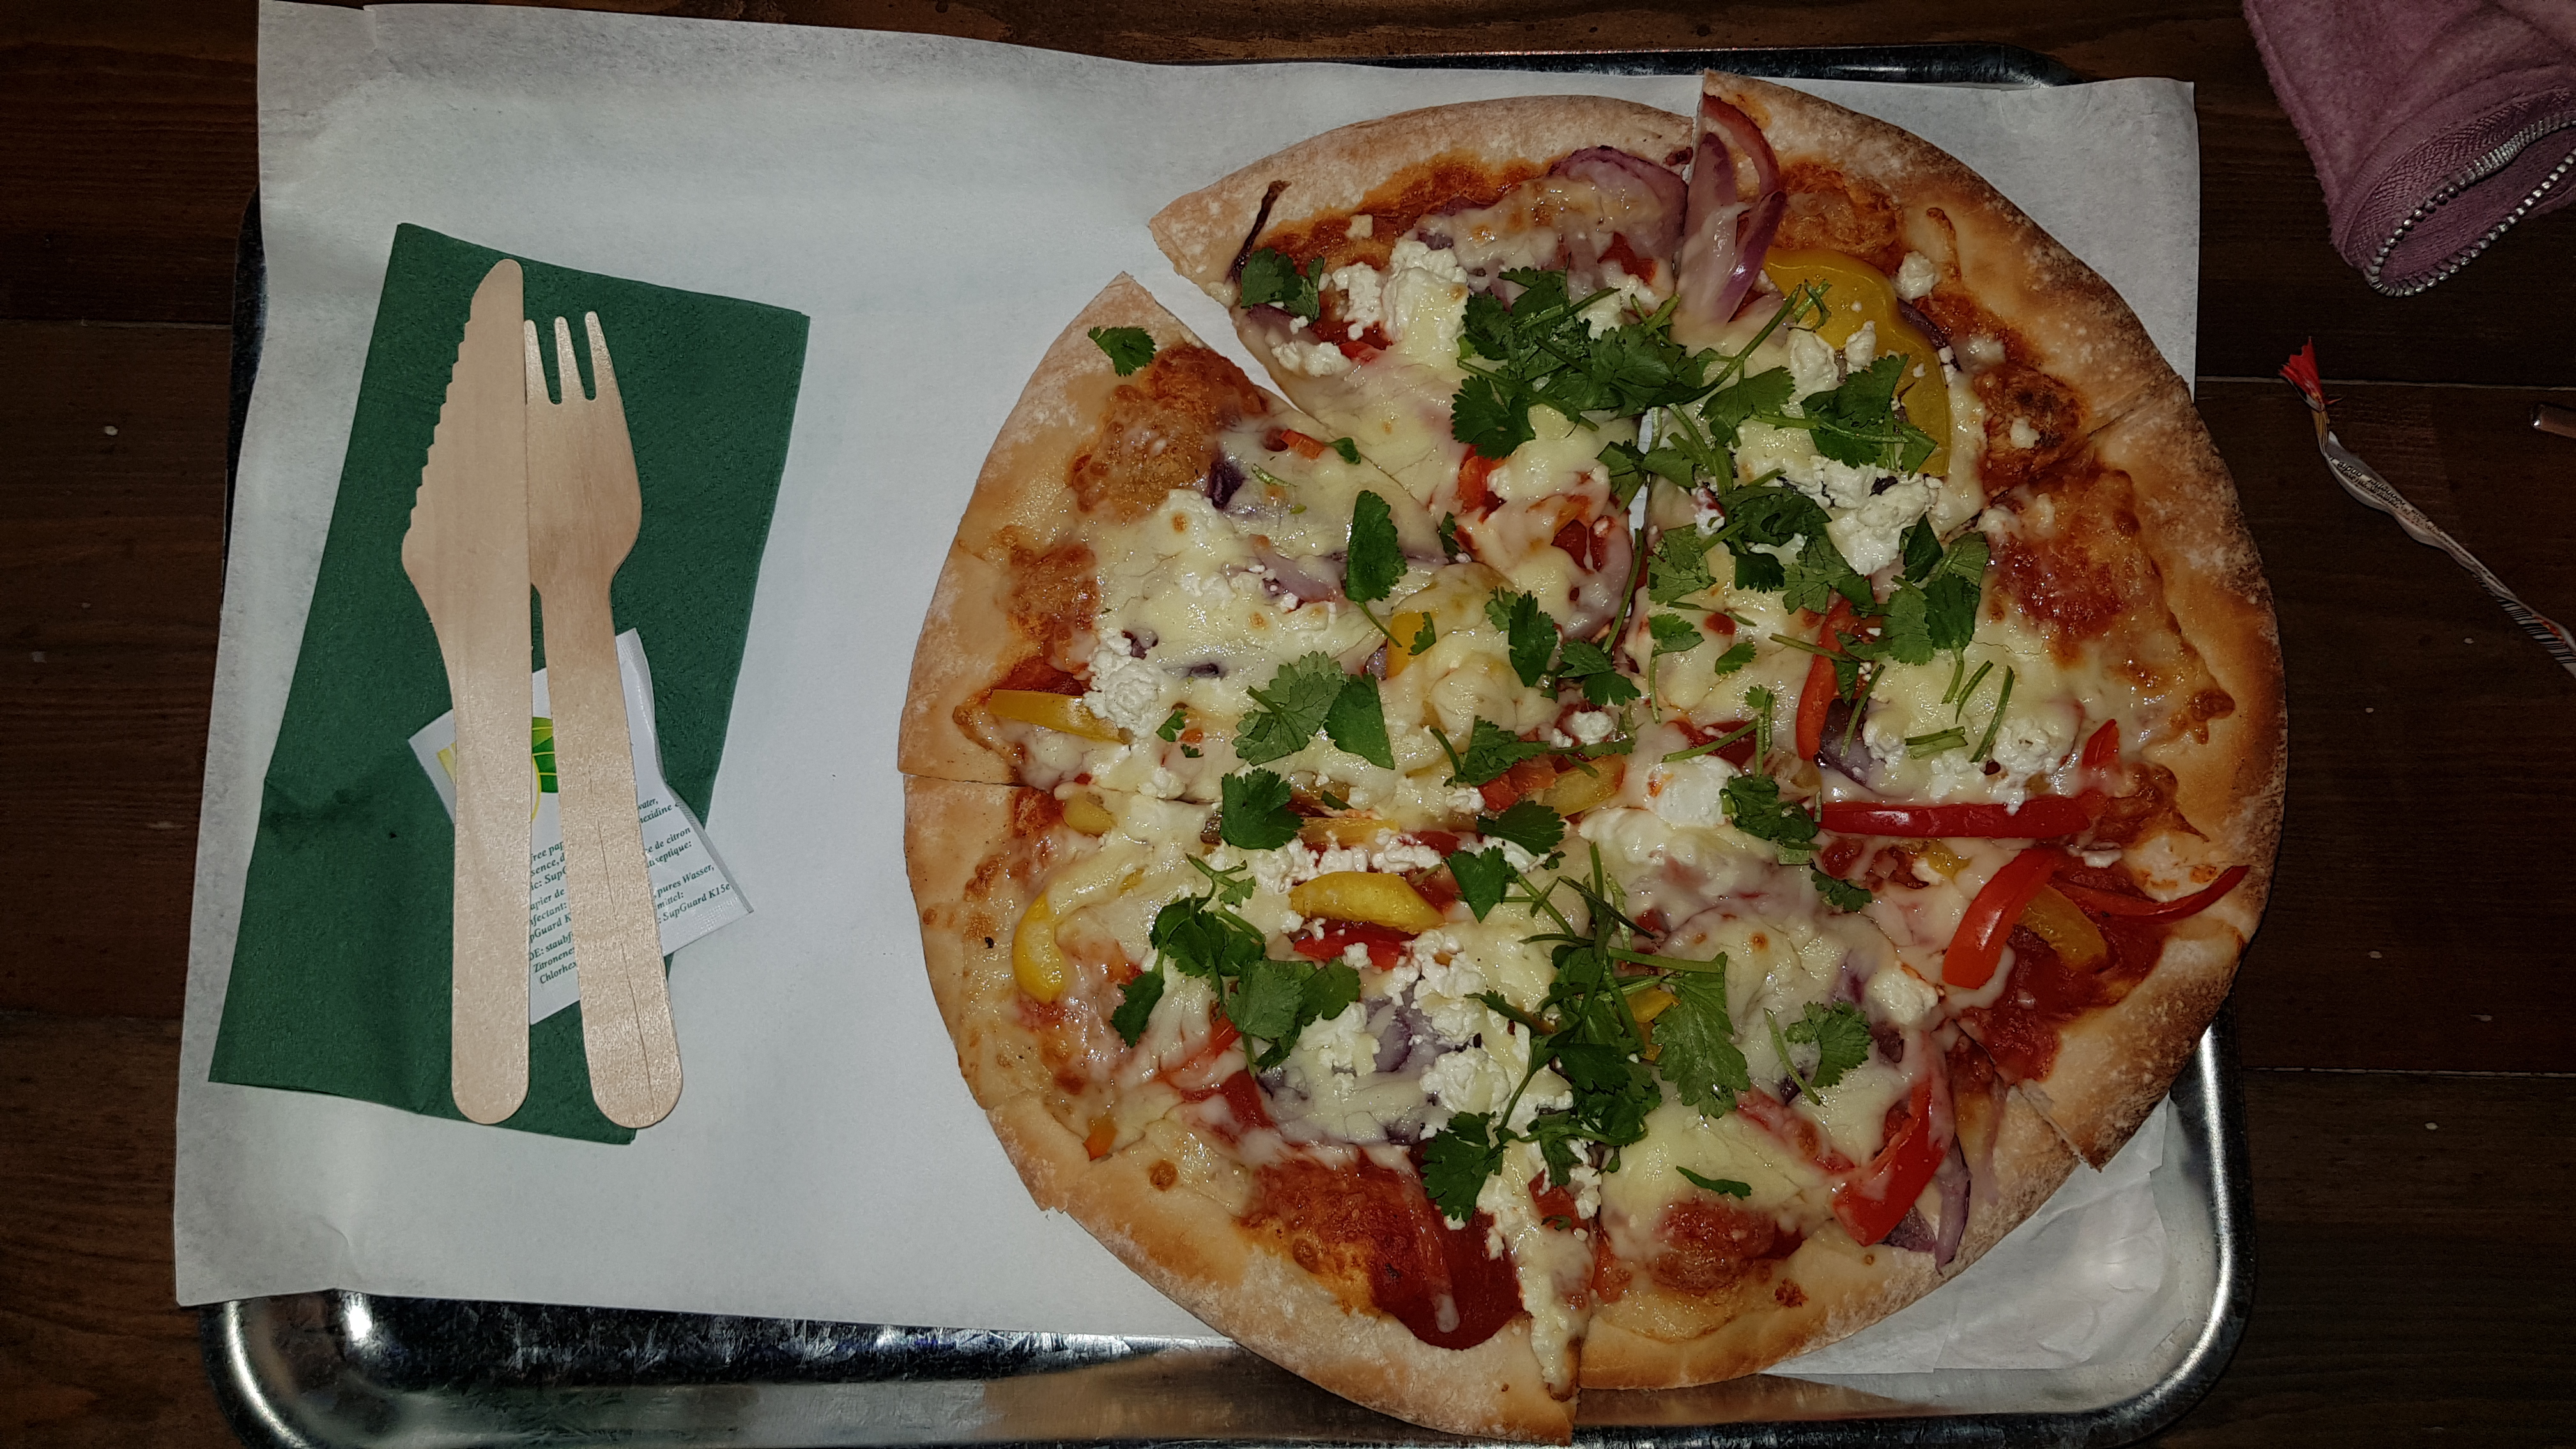 Vegetarian Pizza served in a silver tray with wooden knife and fork. The pizza has onion, peppers, cheese and herbs on it.